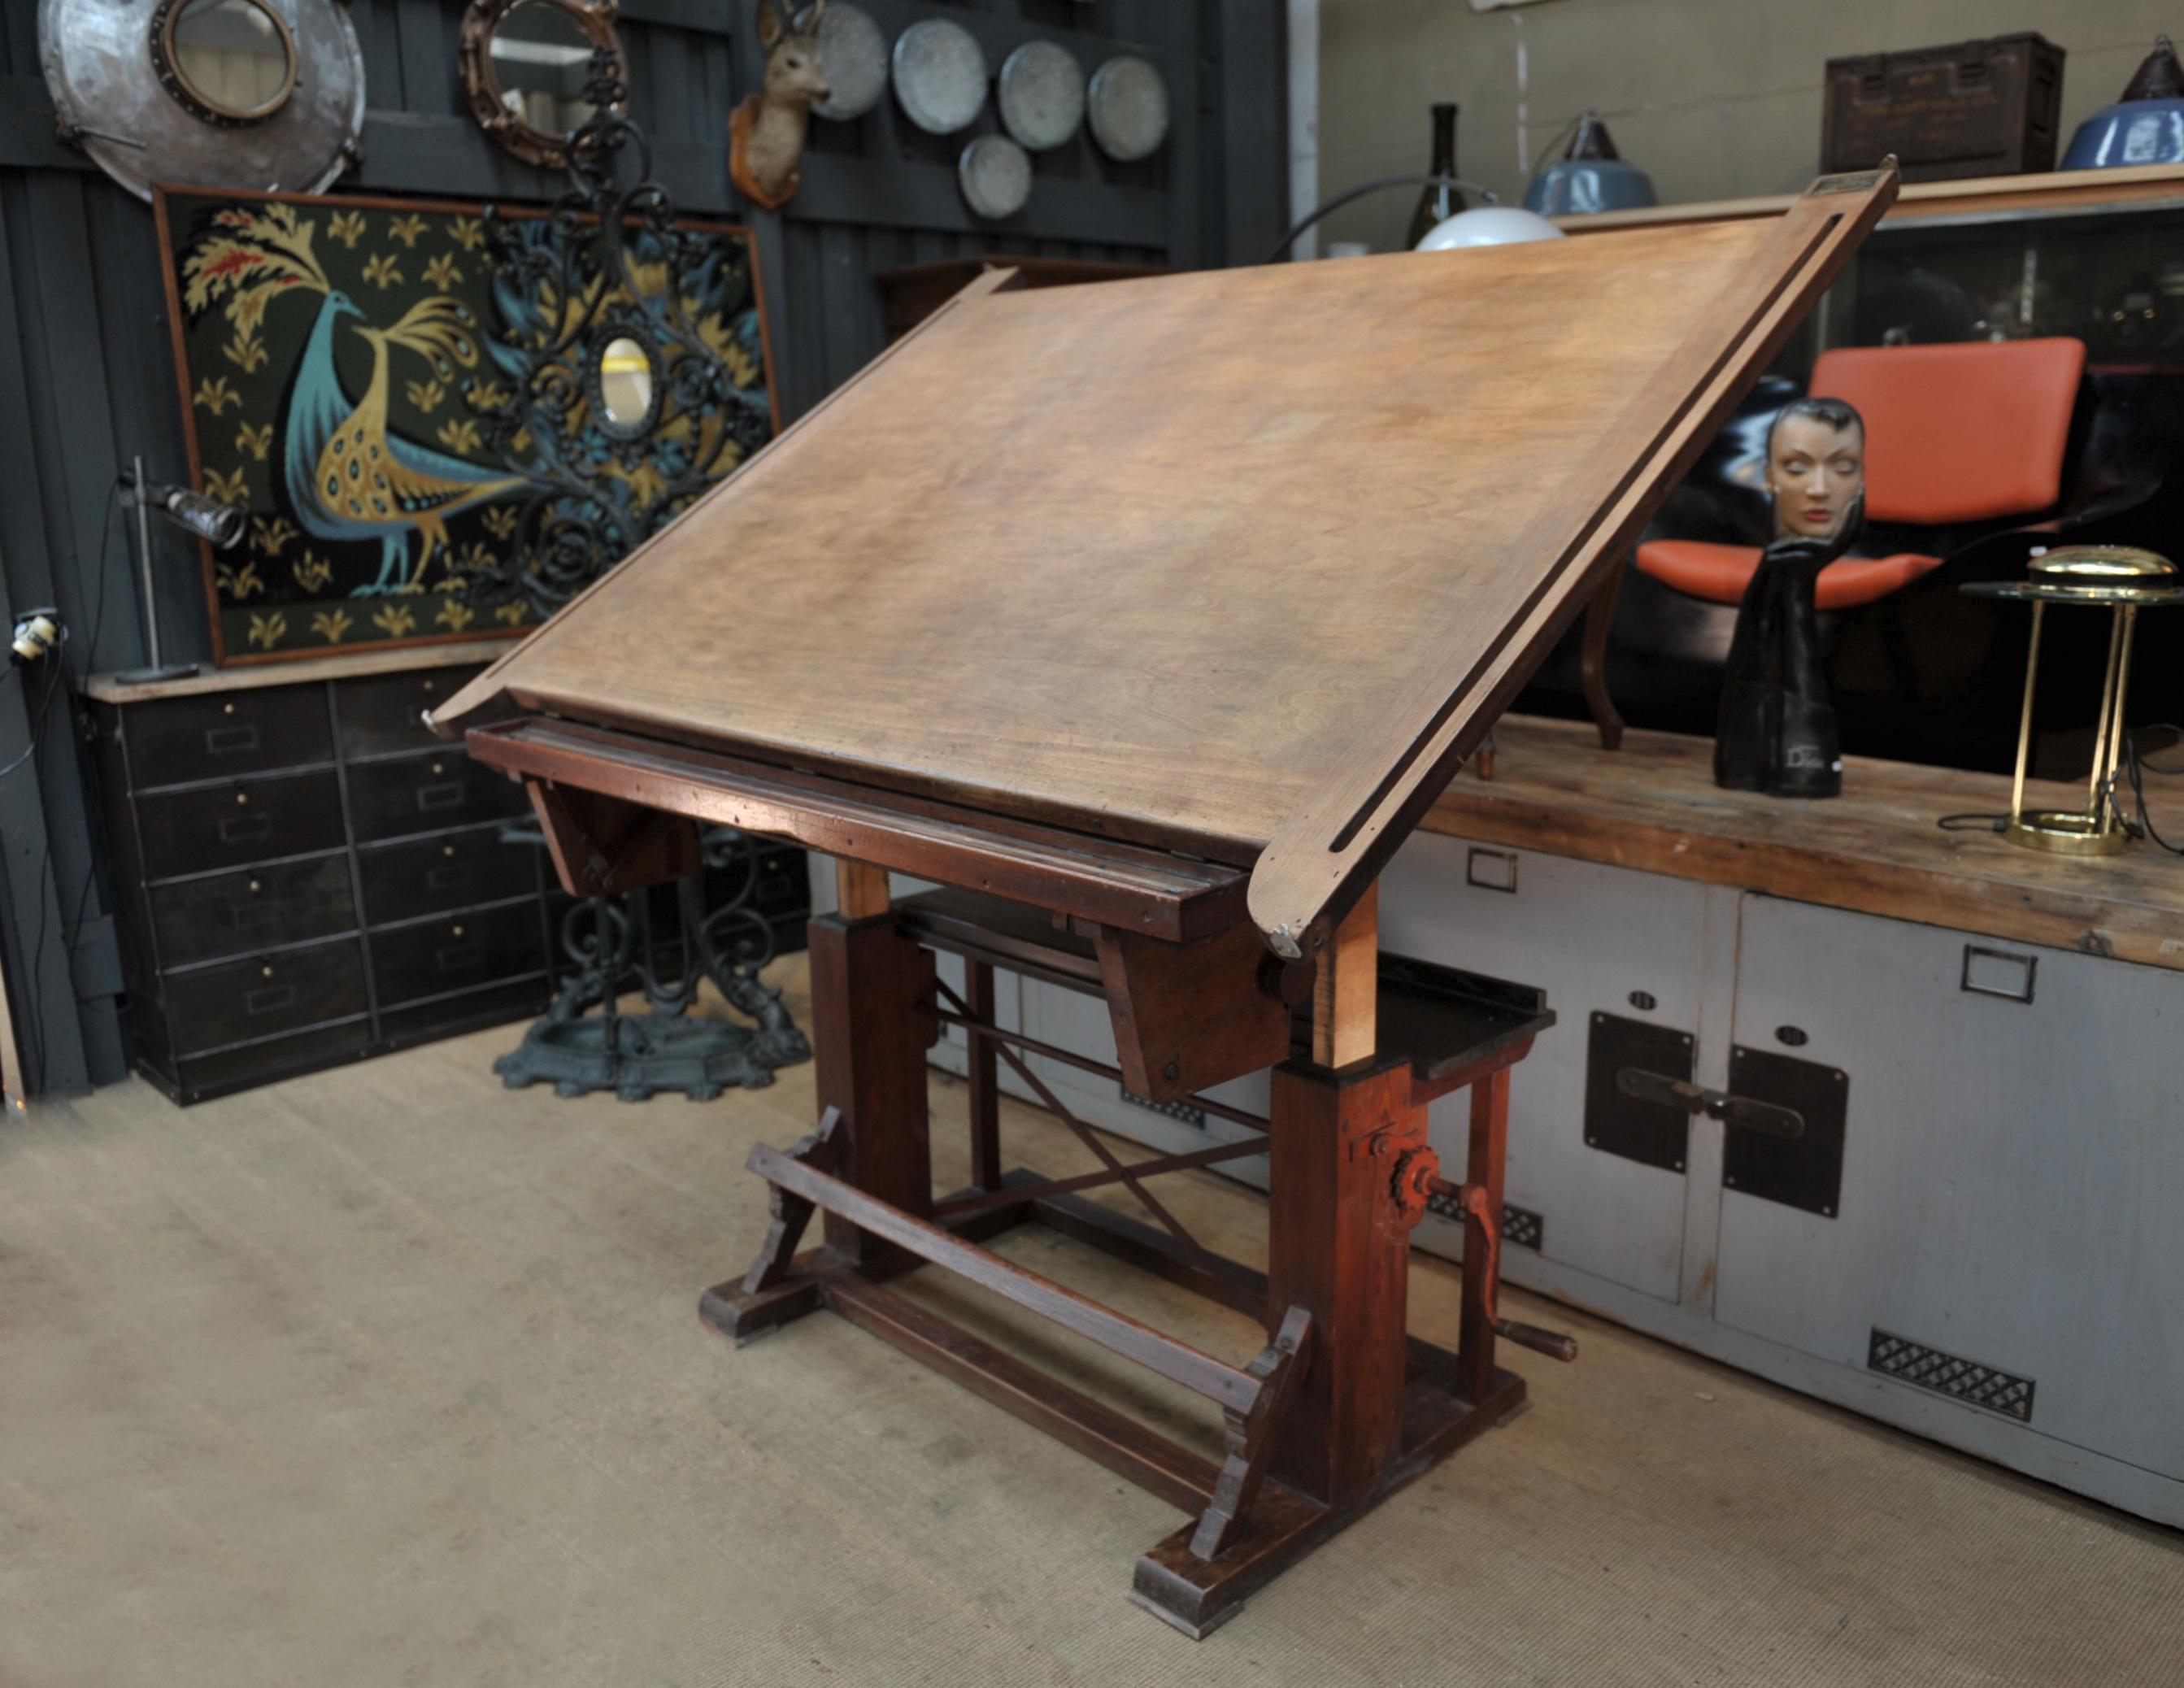 Belgian Adjustable Architect's Drafting Table or Writing Desk, circa 1920s